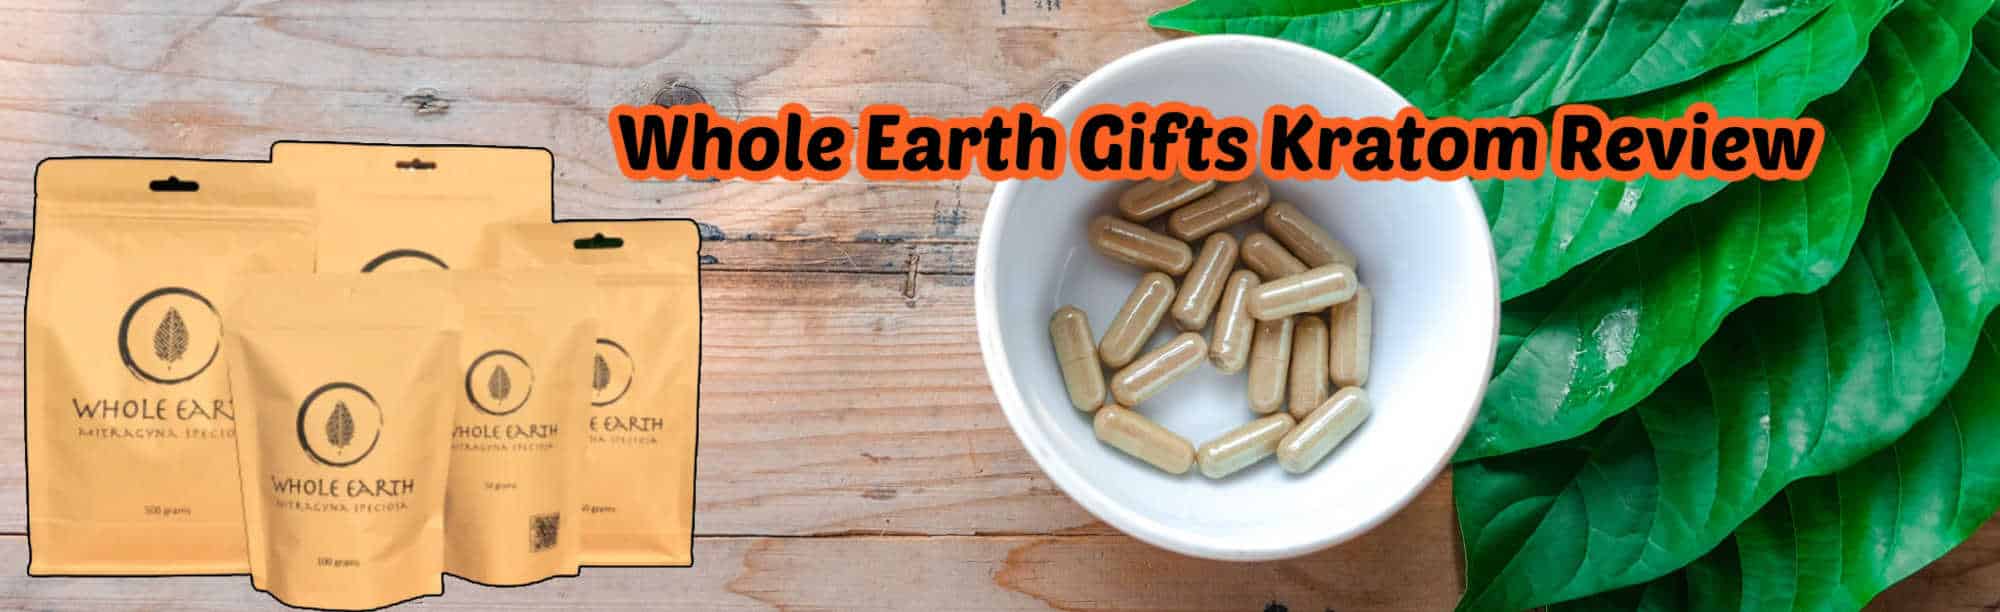 Whole Earth Gifts : The Good, The Bad & The Groovy